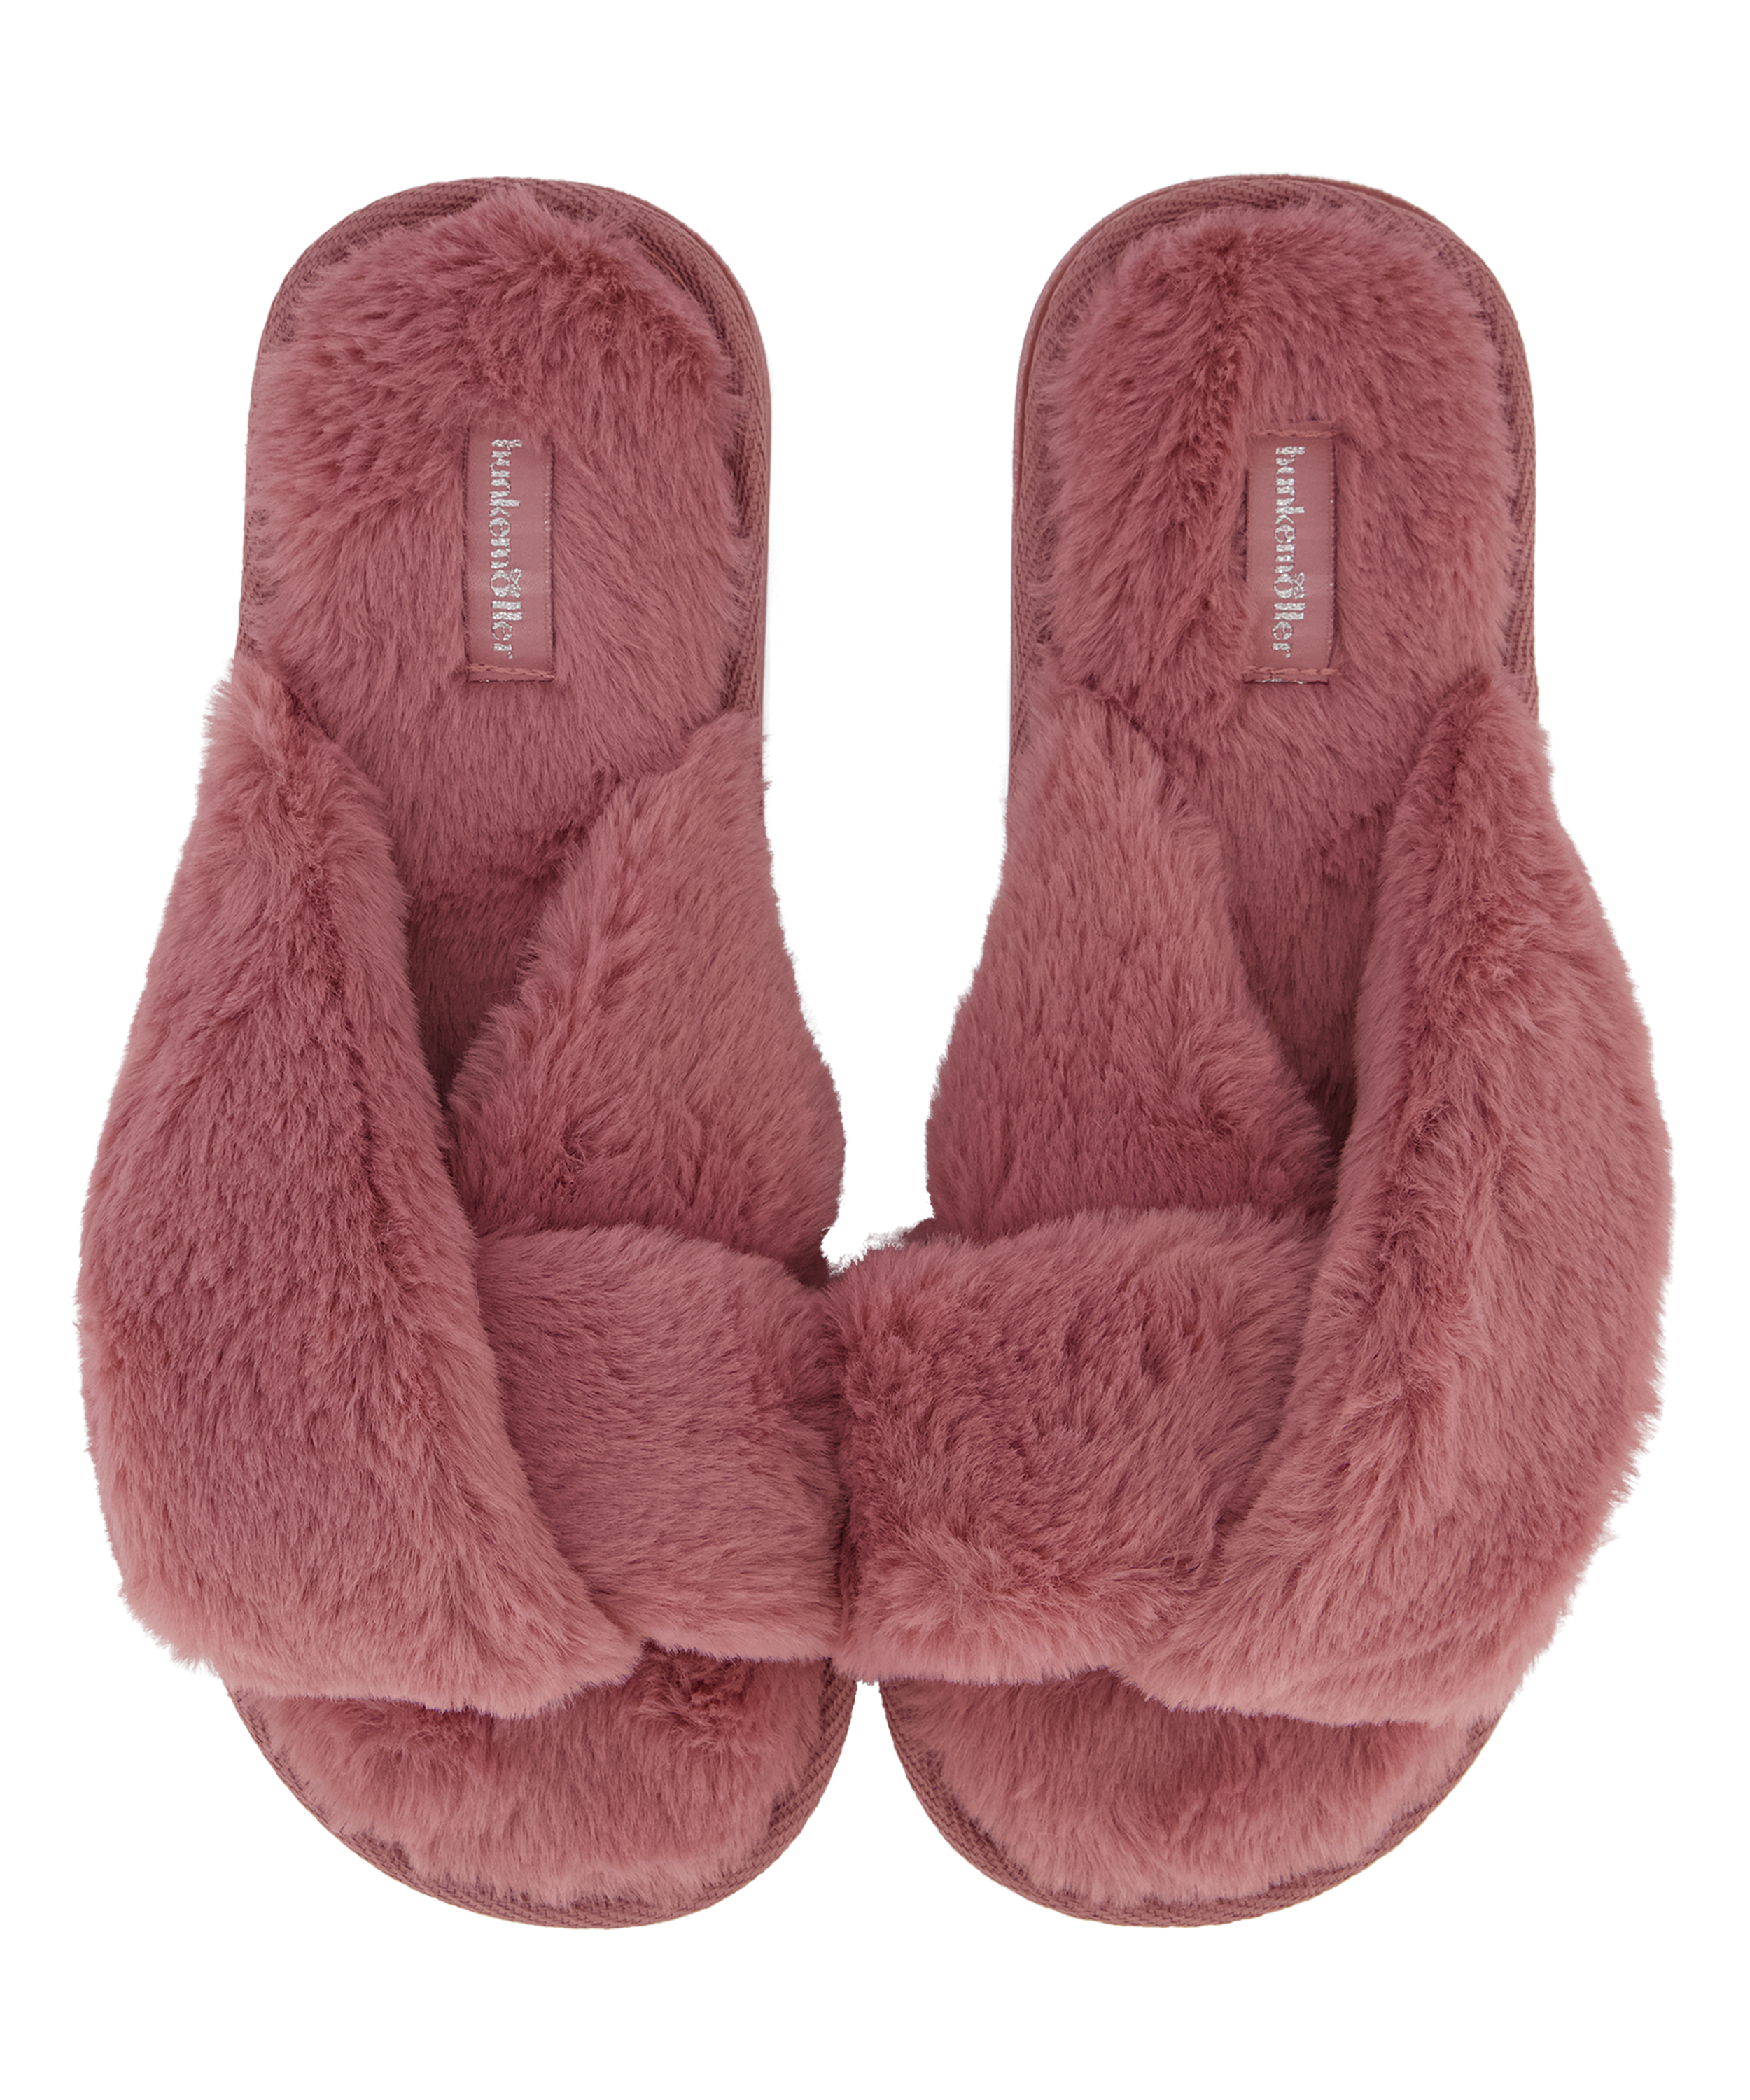 Slippers Twisted Kate, Roze, main